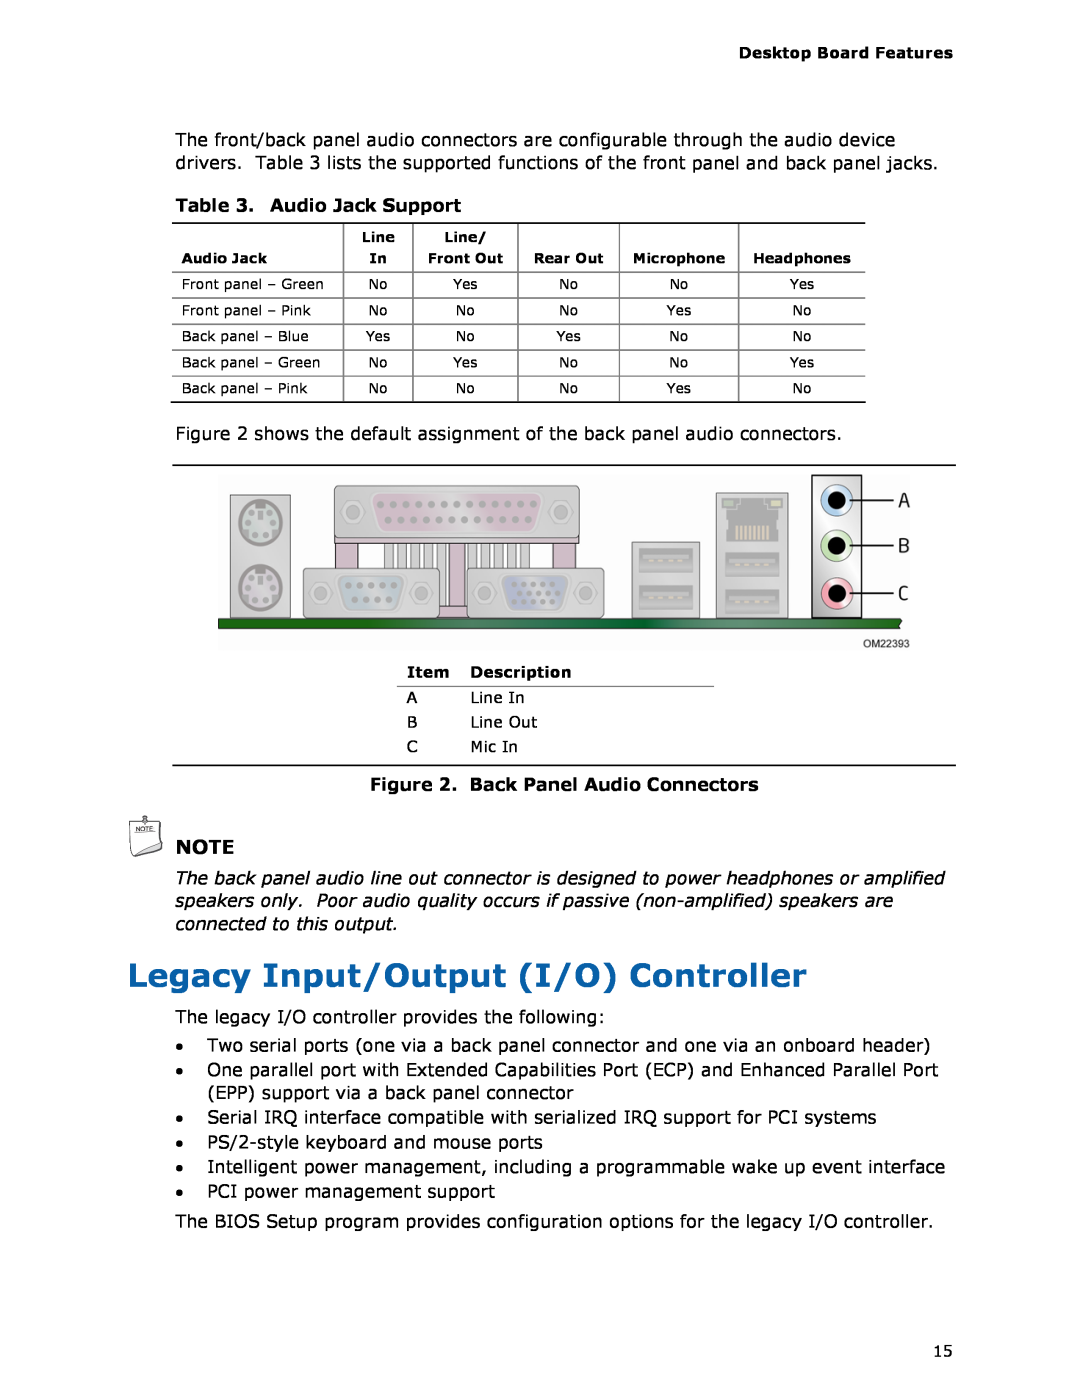 Intel D425KT manual Legacy Input/Output I/O Controller, Audio Jack Support, Back Panel Audio Connectors 